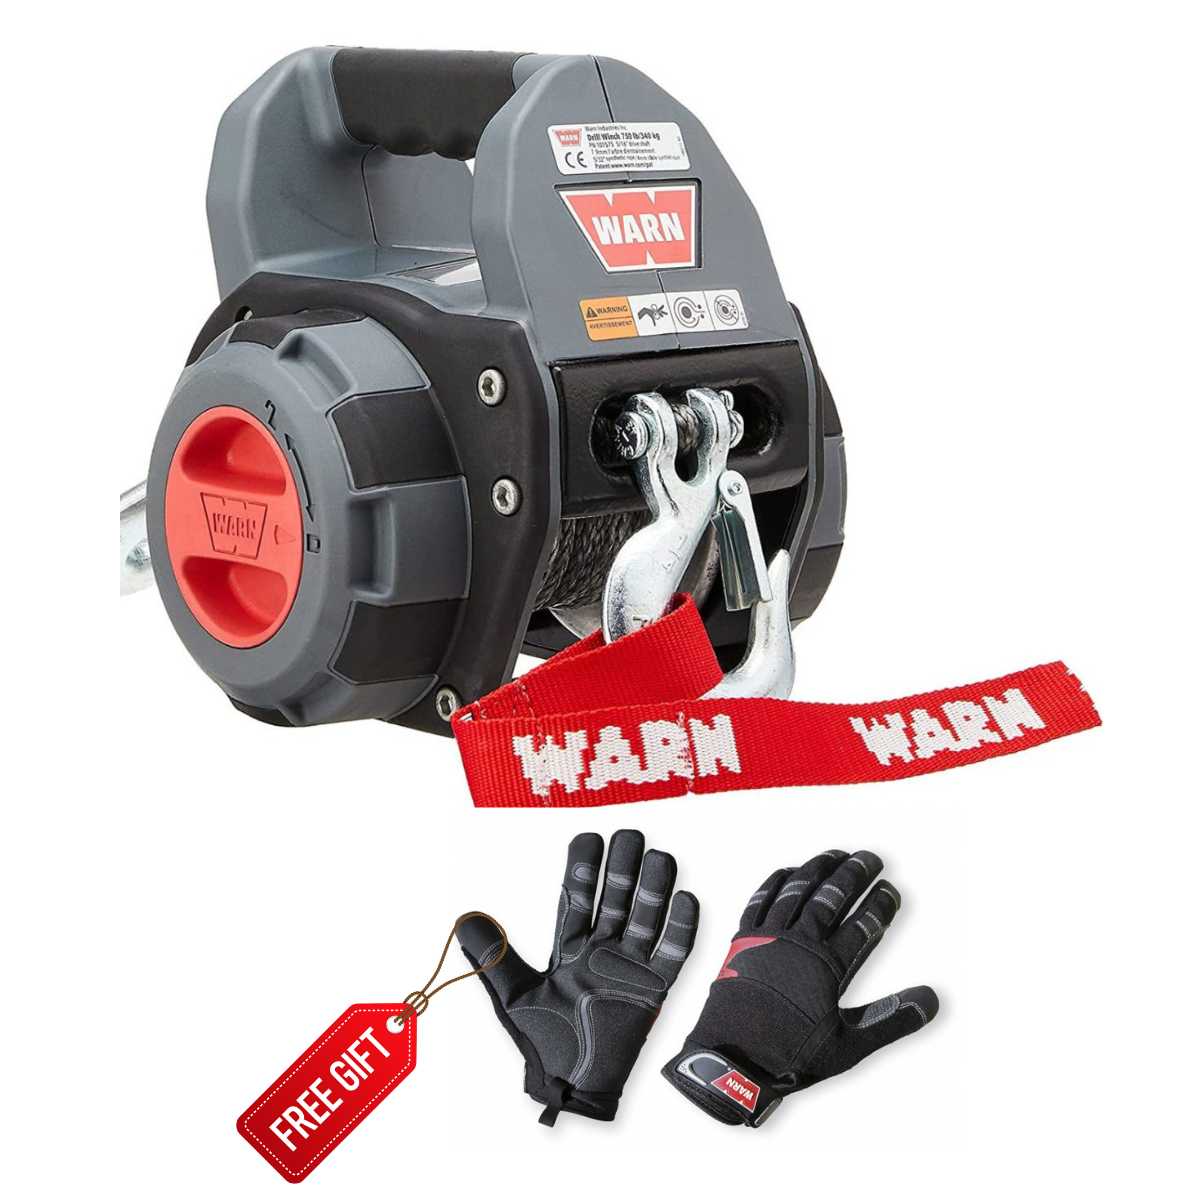 WARN Portable Drill Powered Winch - Synthetic Rope - 750lbs